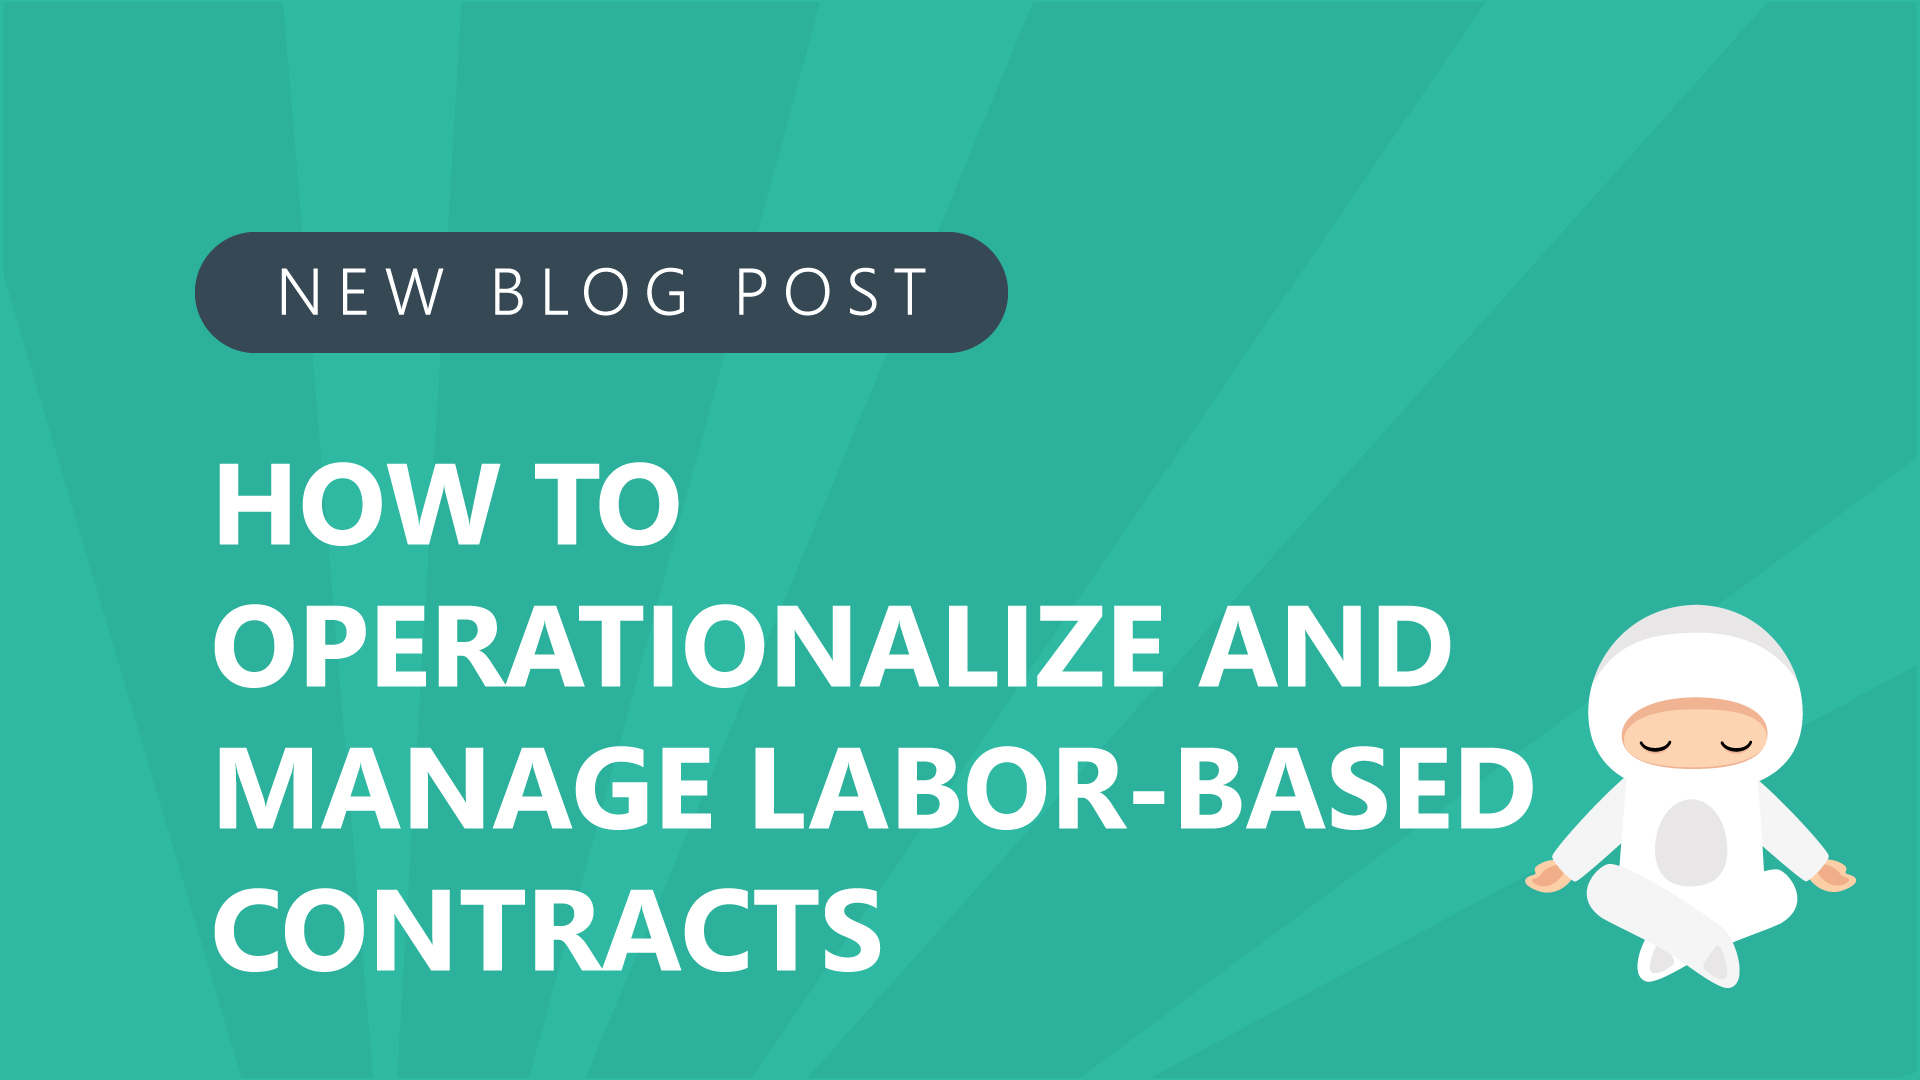 21-How-to-Operationalize-and-Manage-Labor-Based-Contract.jpg